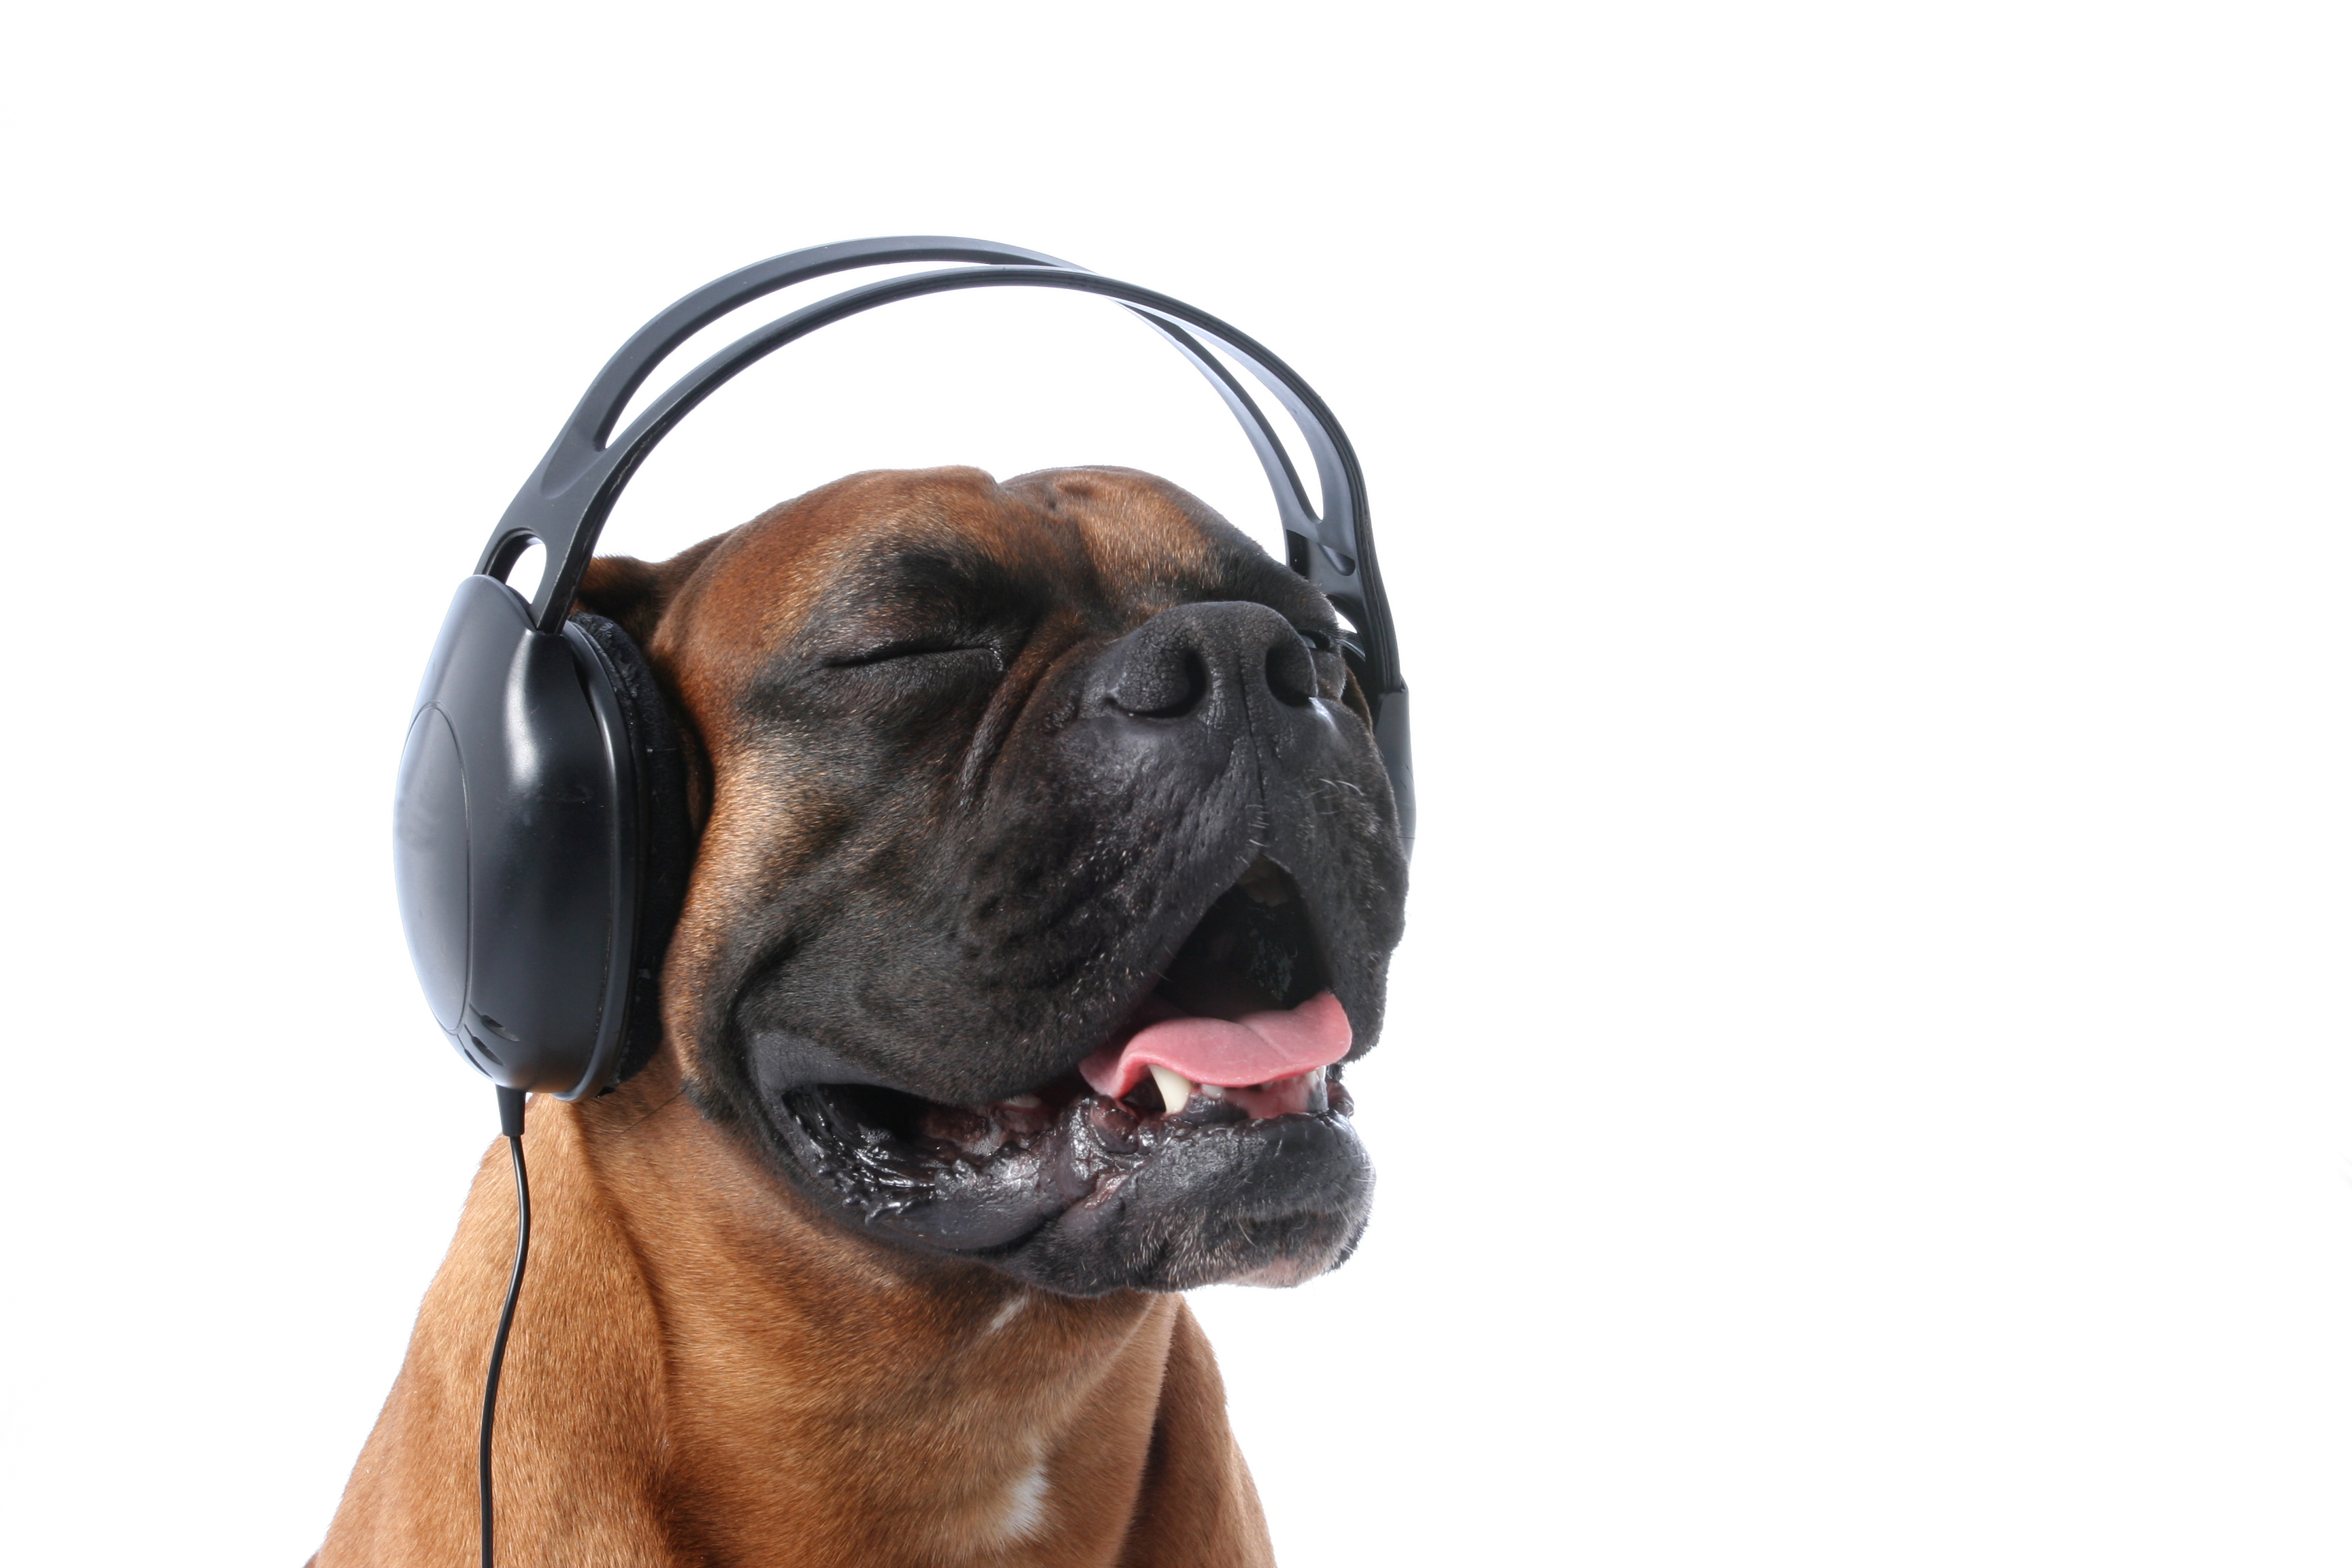 Dogs ike jazz and folk music, but don’t like hip hop and heavy metal, a new study has revealed